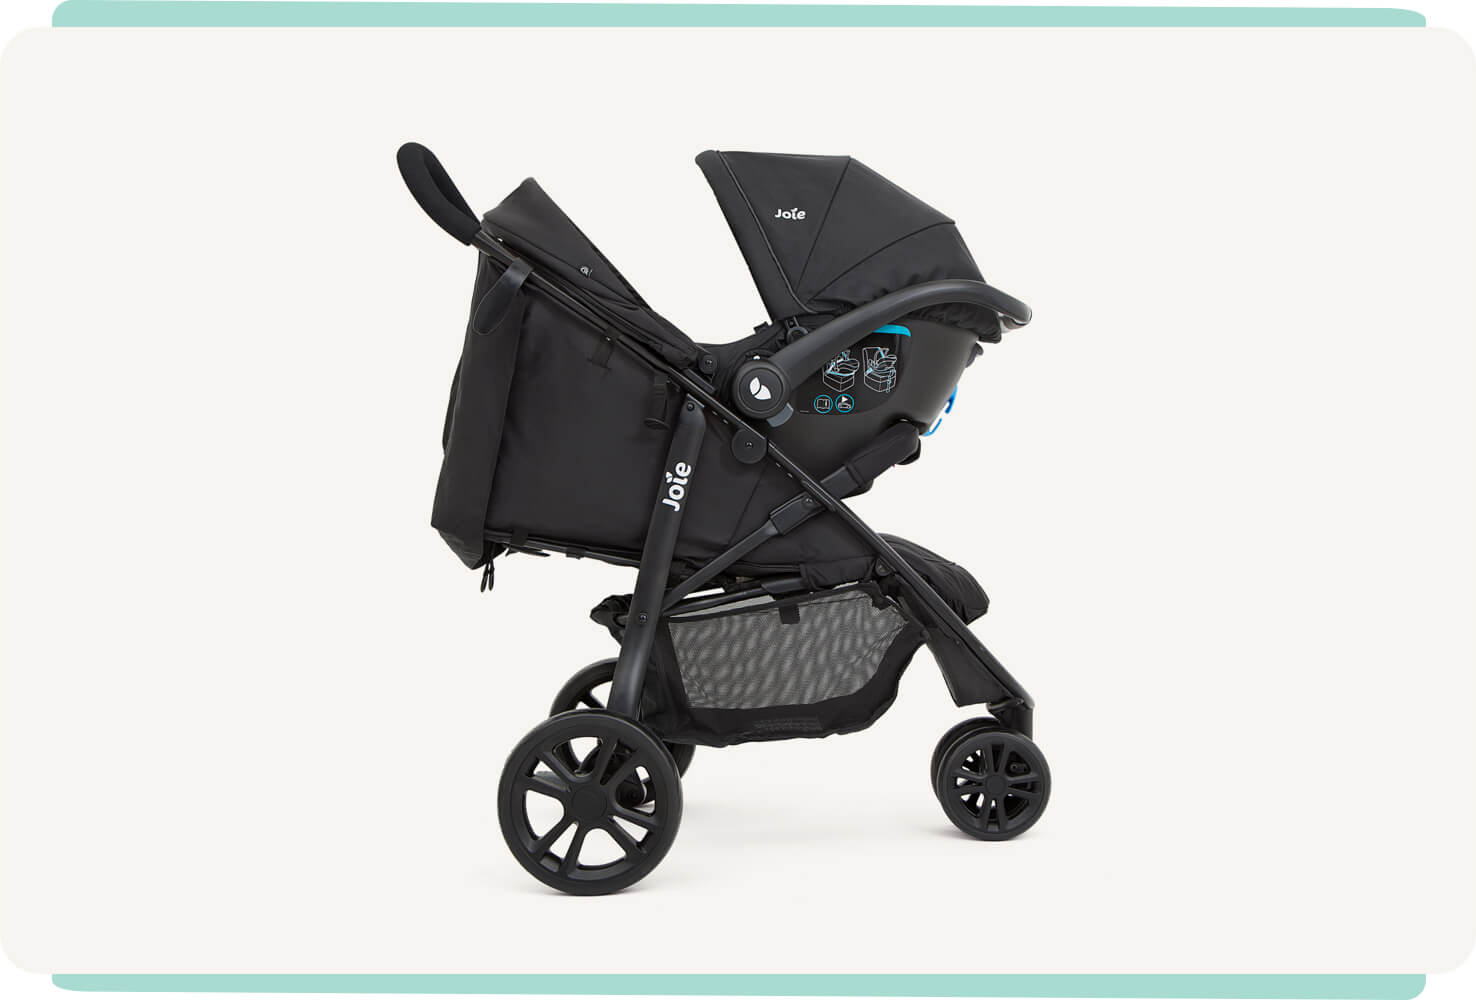   Joie litetrax 3 travel system in black with gemm infant carrier at an angle.